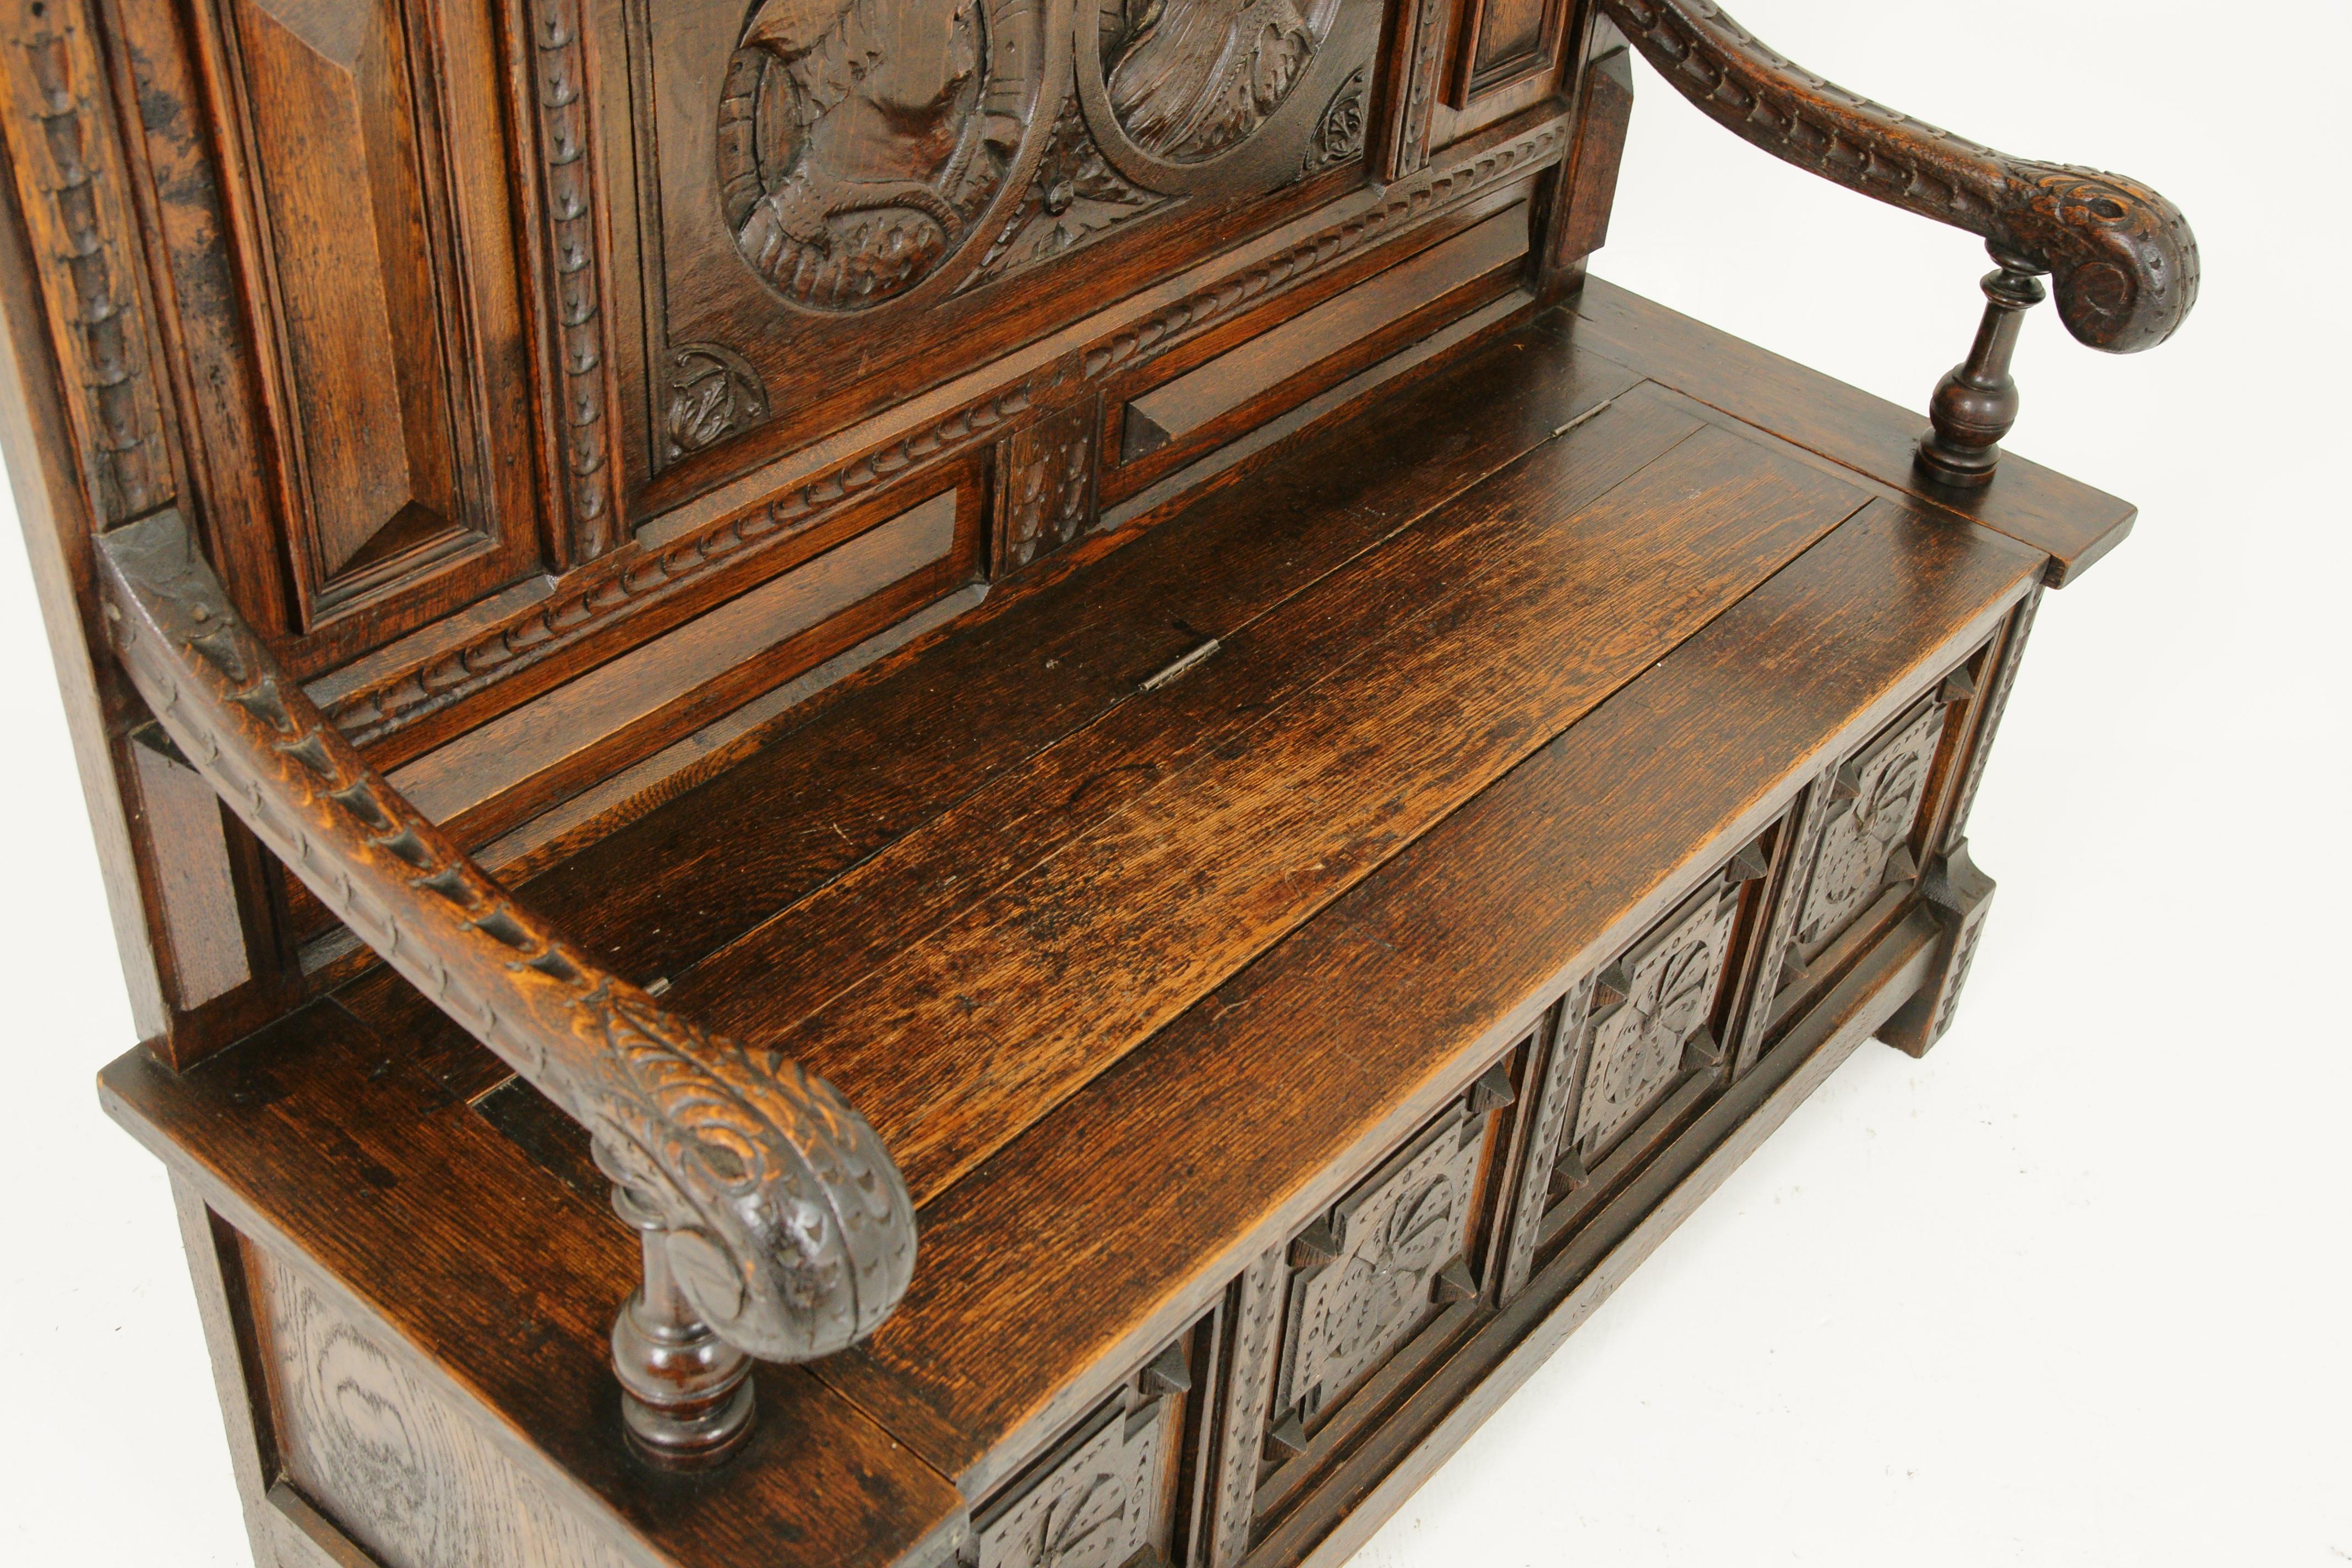 Hand-Carved Antique Hall Bench, Monks Bench, Settle, Hall Bench, Scotland 1870, B1742